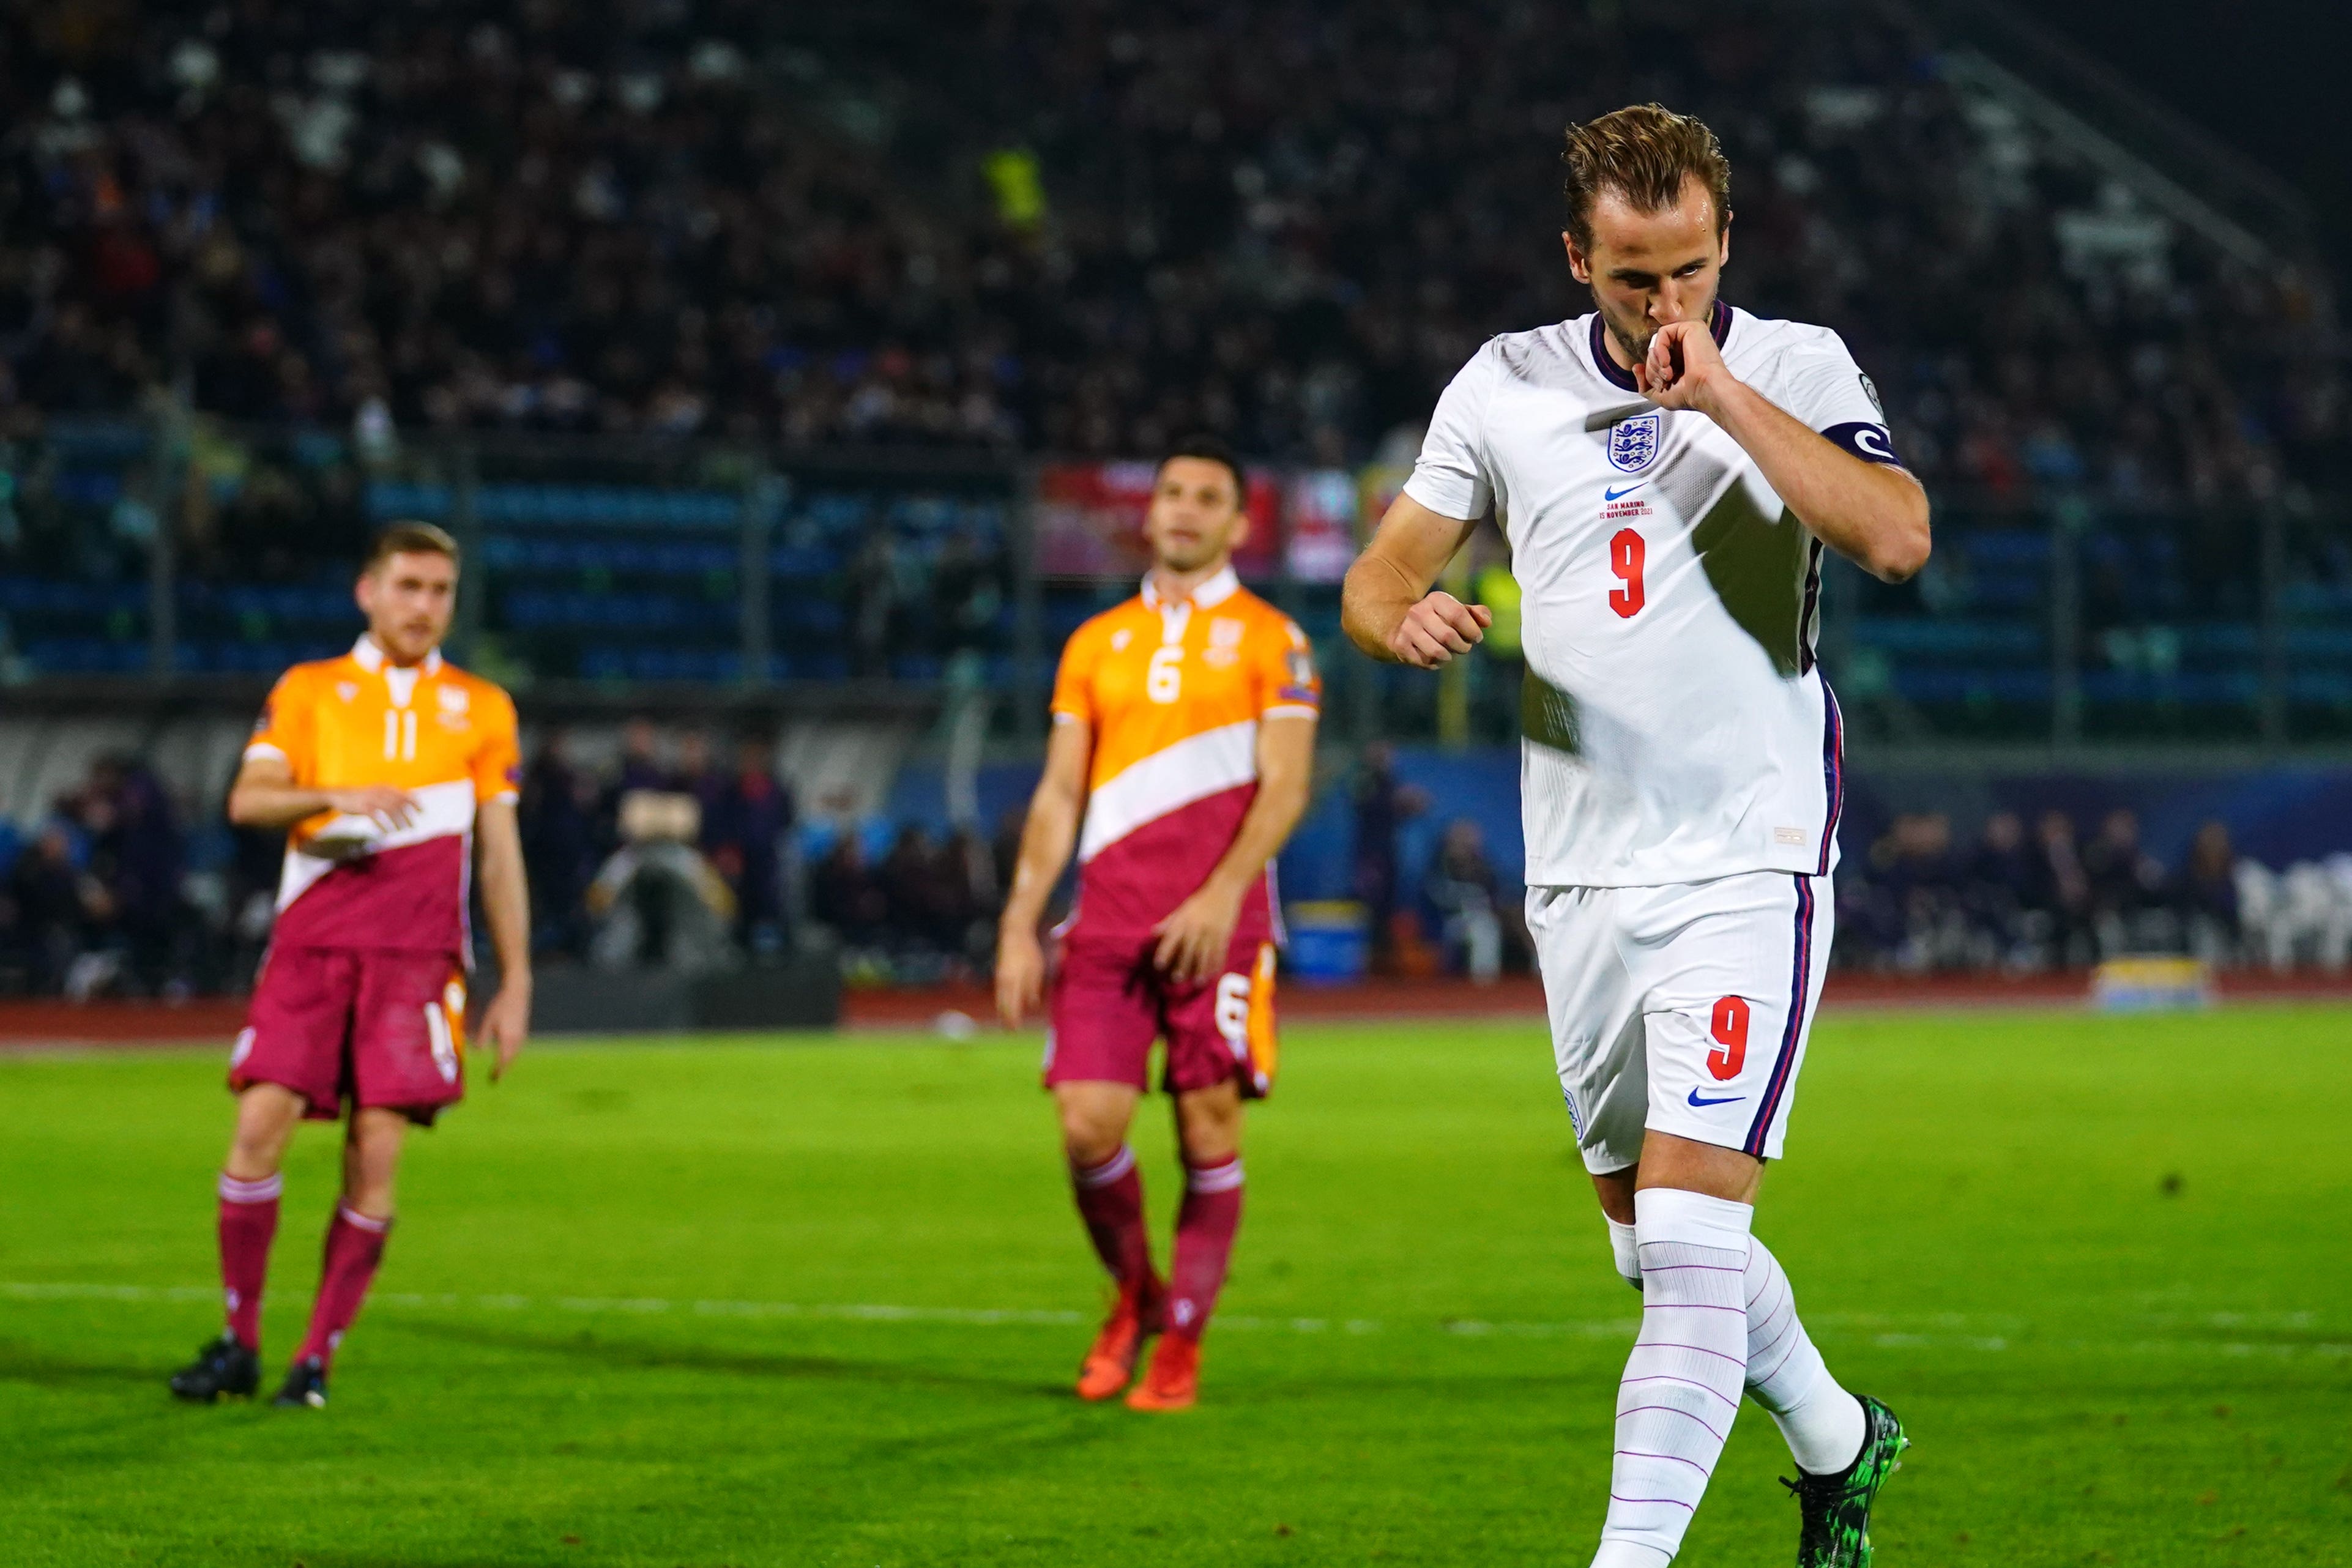 Harry Kane led the way with 12 goals as England finished top of their World Cup qualifying group (Nick Potts/PA)